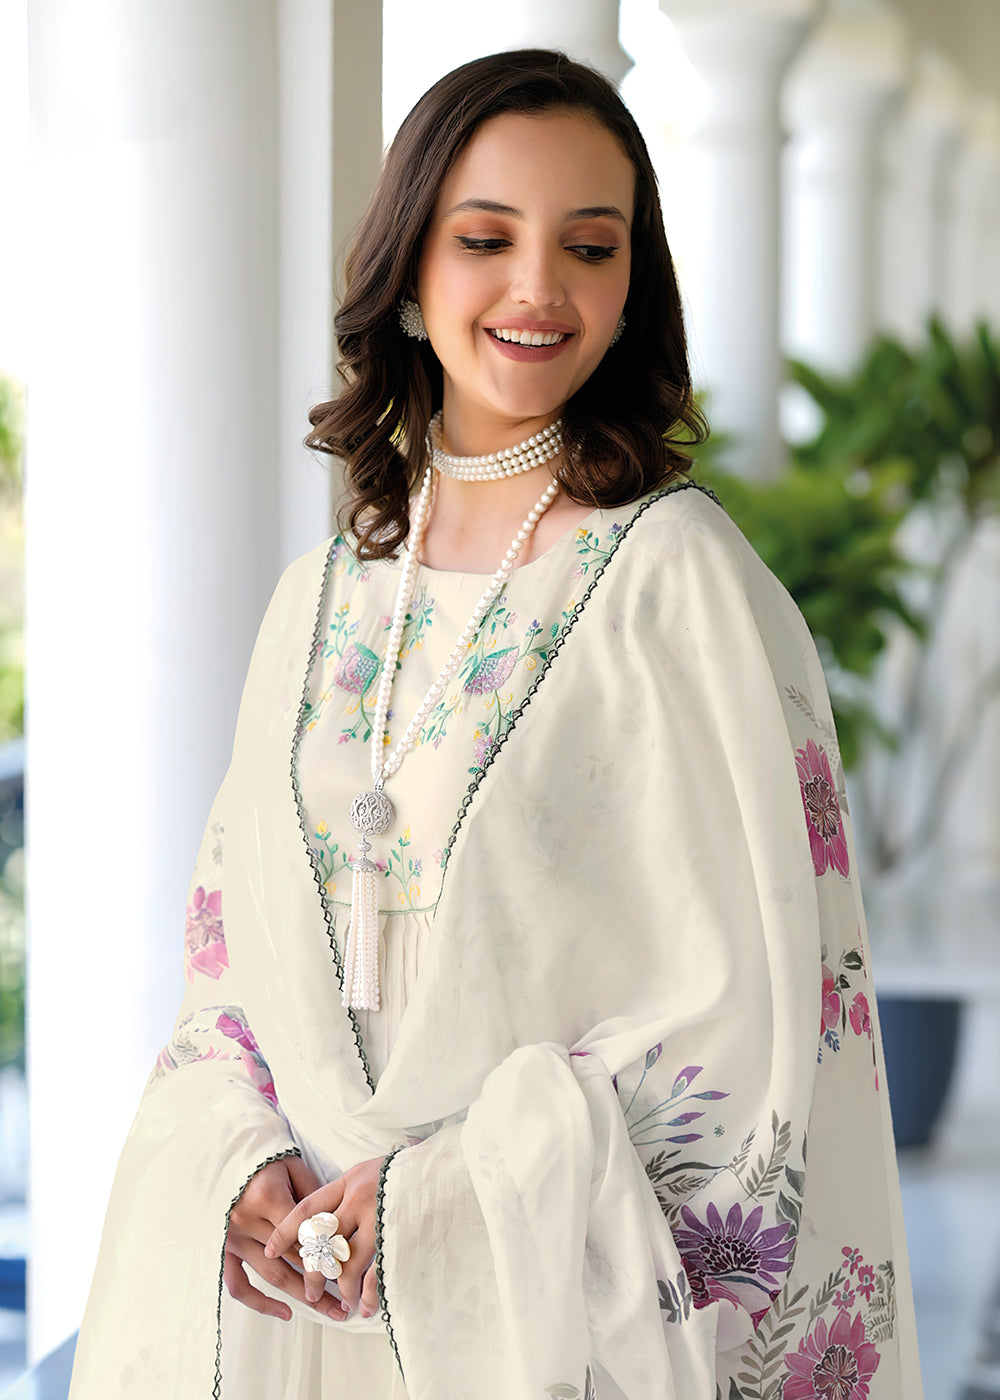 Buy Now Graceful Off White Mal Mal Cotton Salwar Suit Online in USA, UK, Canada, Germany, Australia & Worldwide at Empress Clothing.